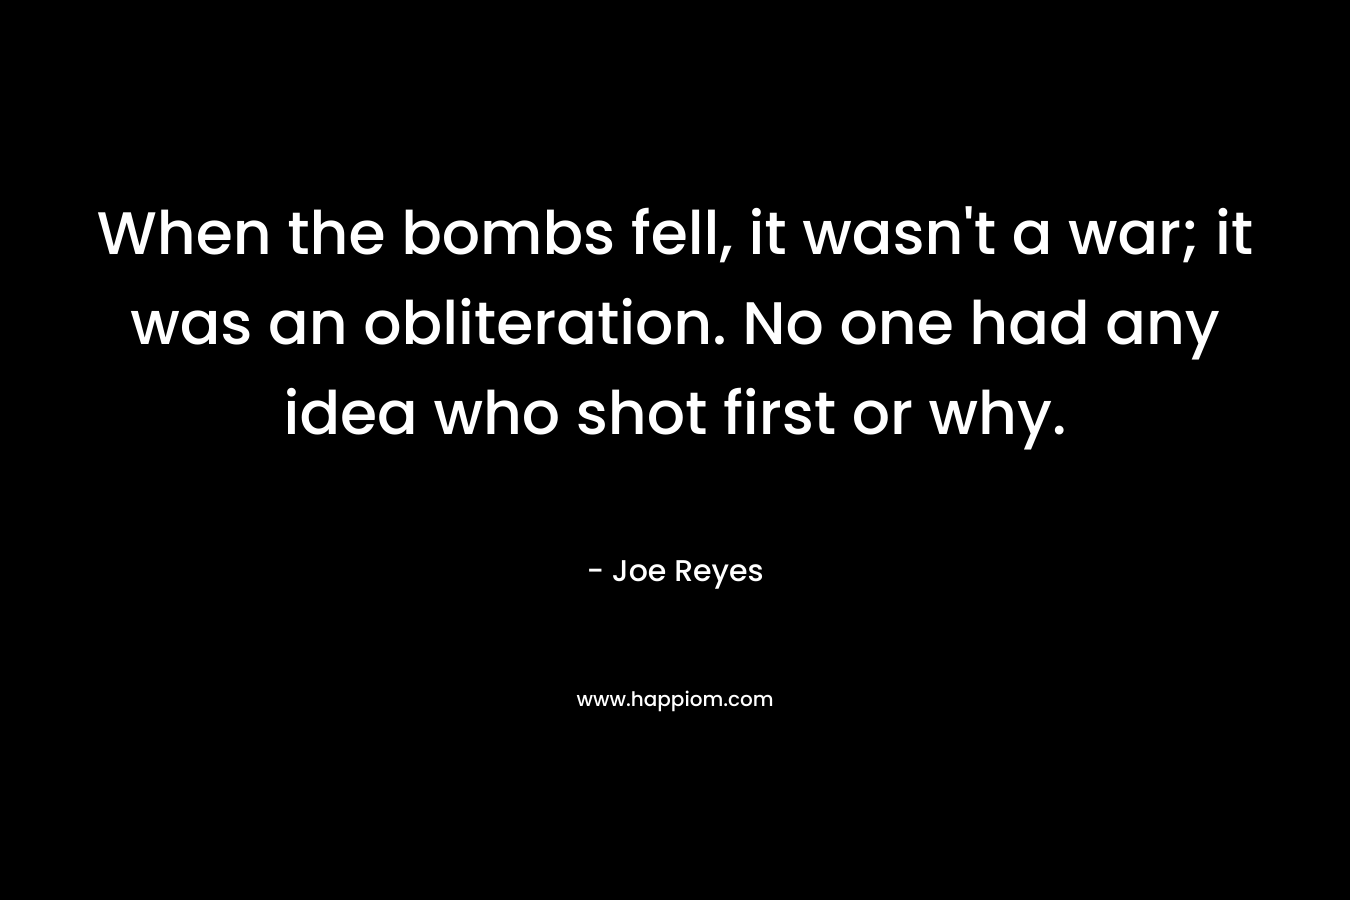 When the bombs fell, it wasn’t a war; it was an obliteration. No one had any idea who shot first or why. – Joe Reyes